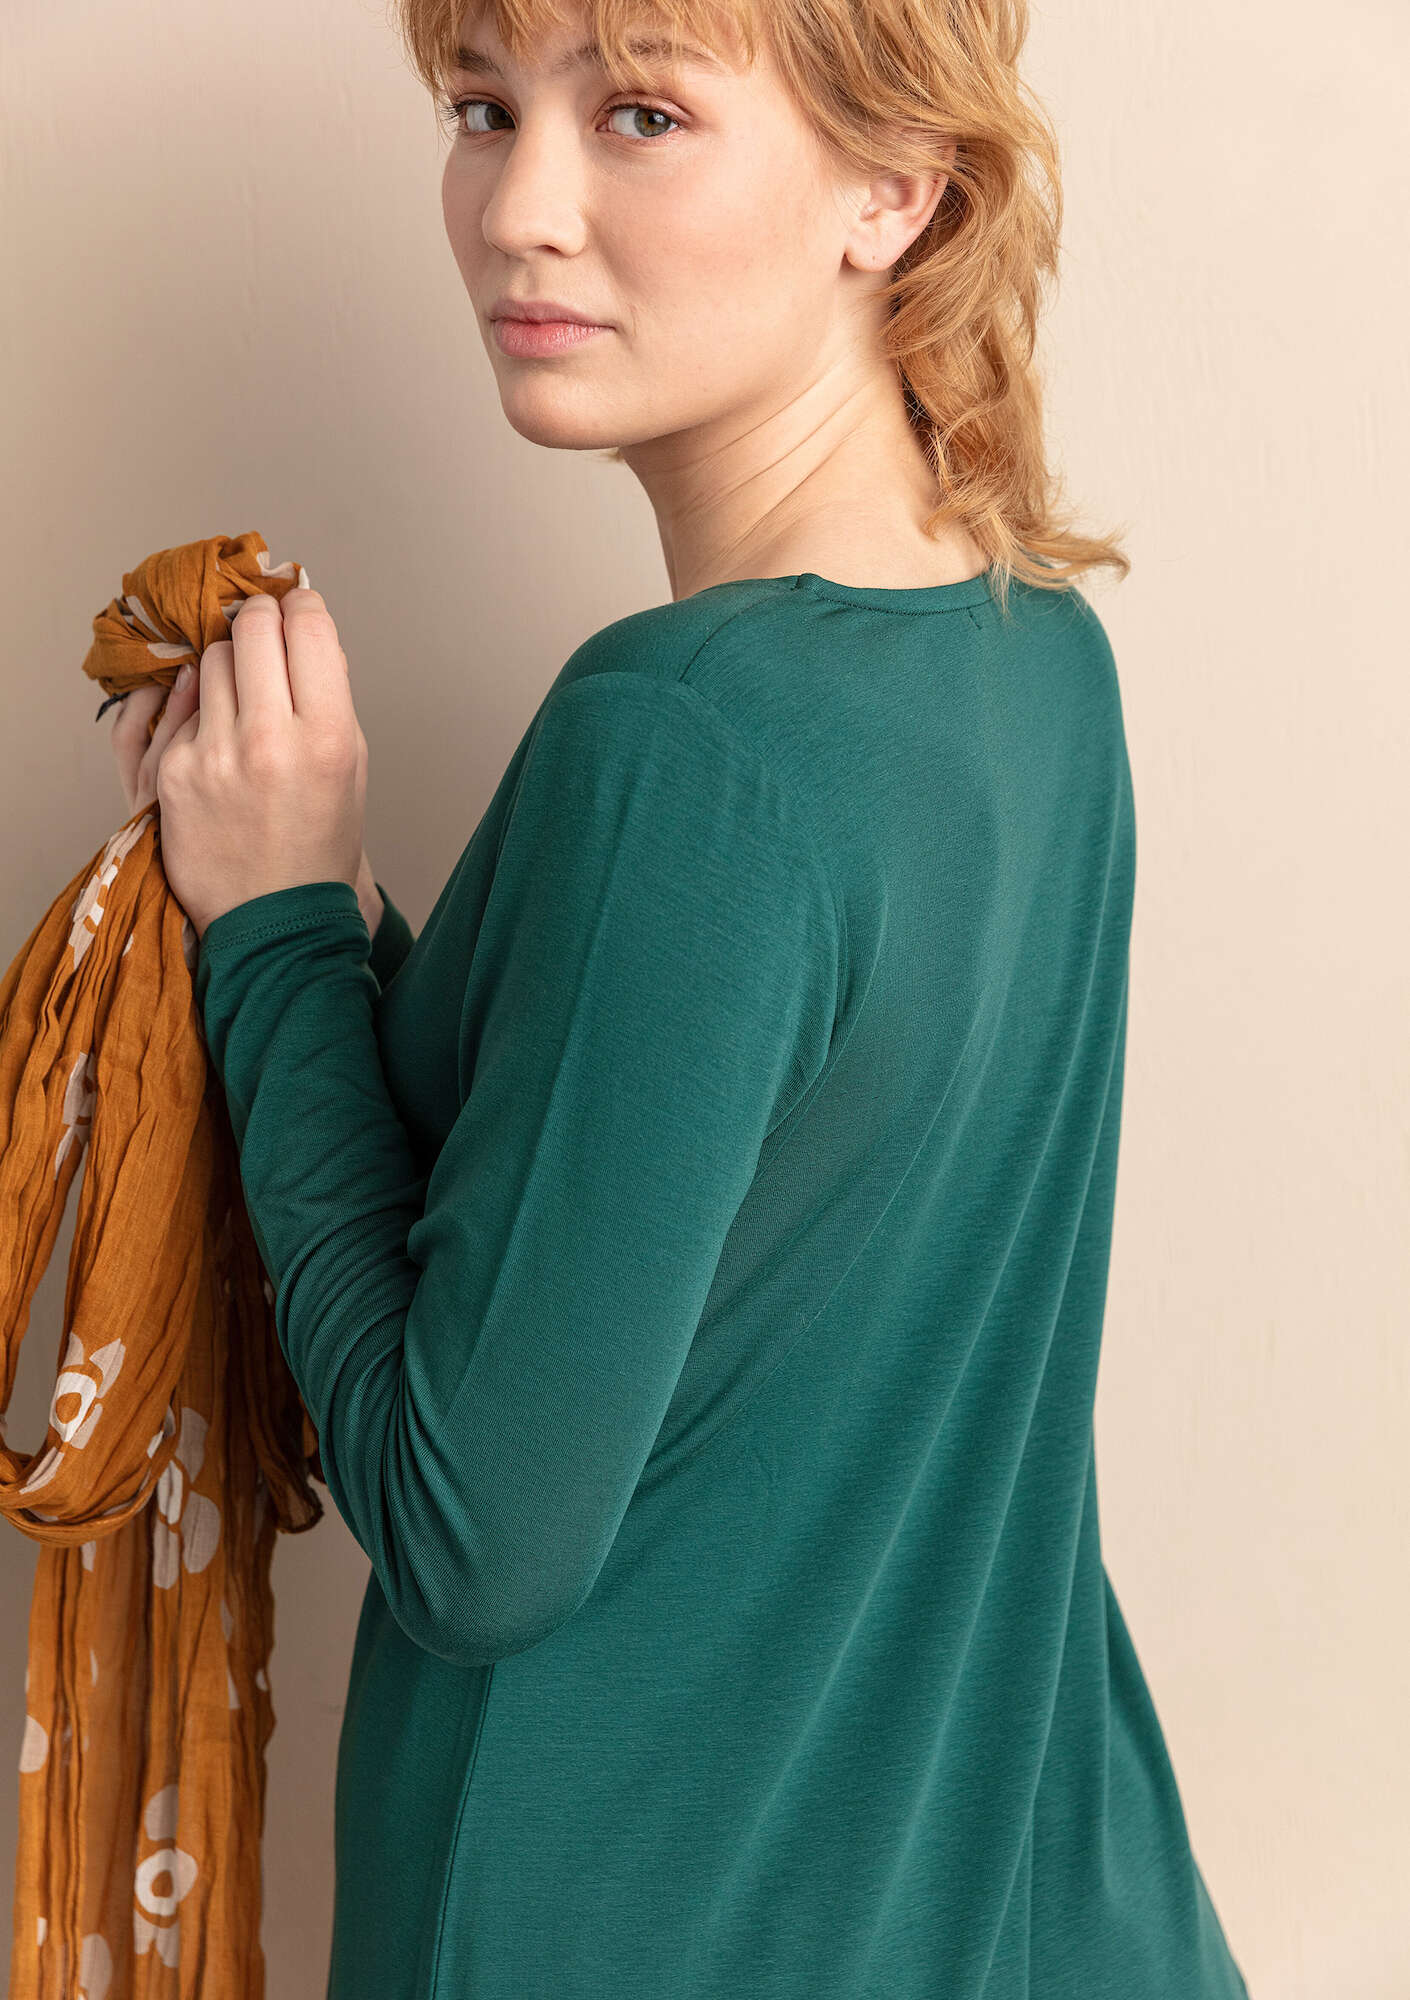 Tricot top bottle green